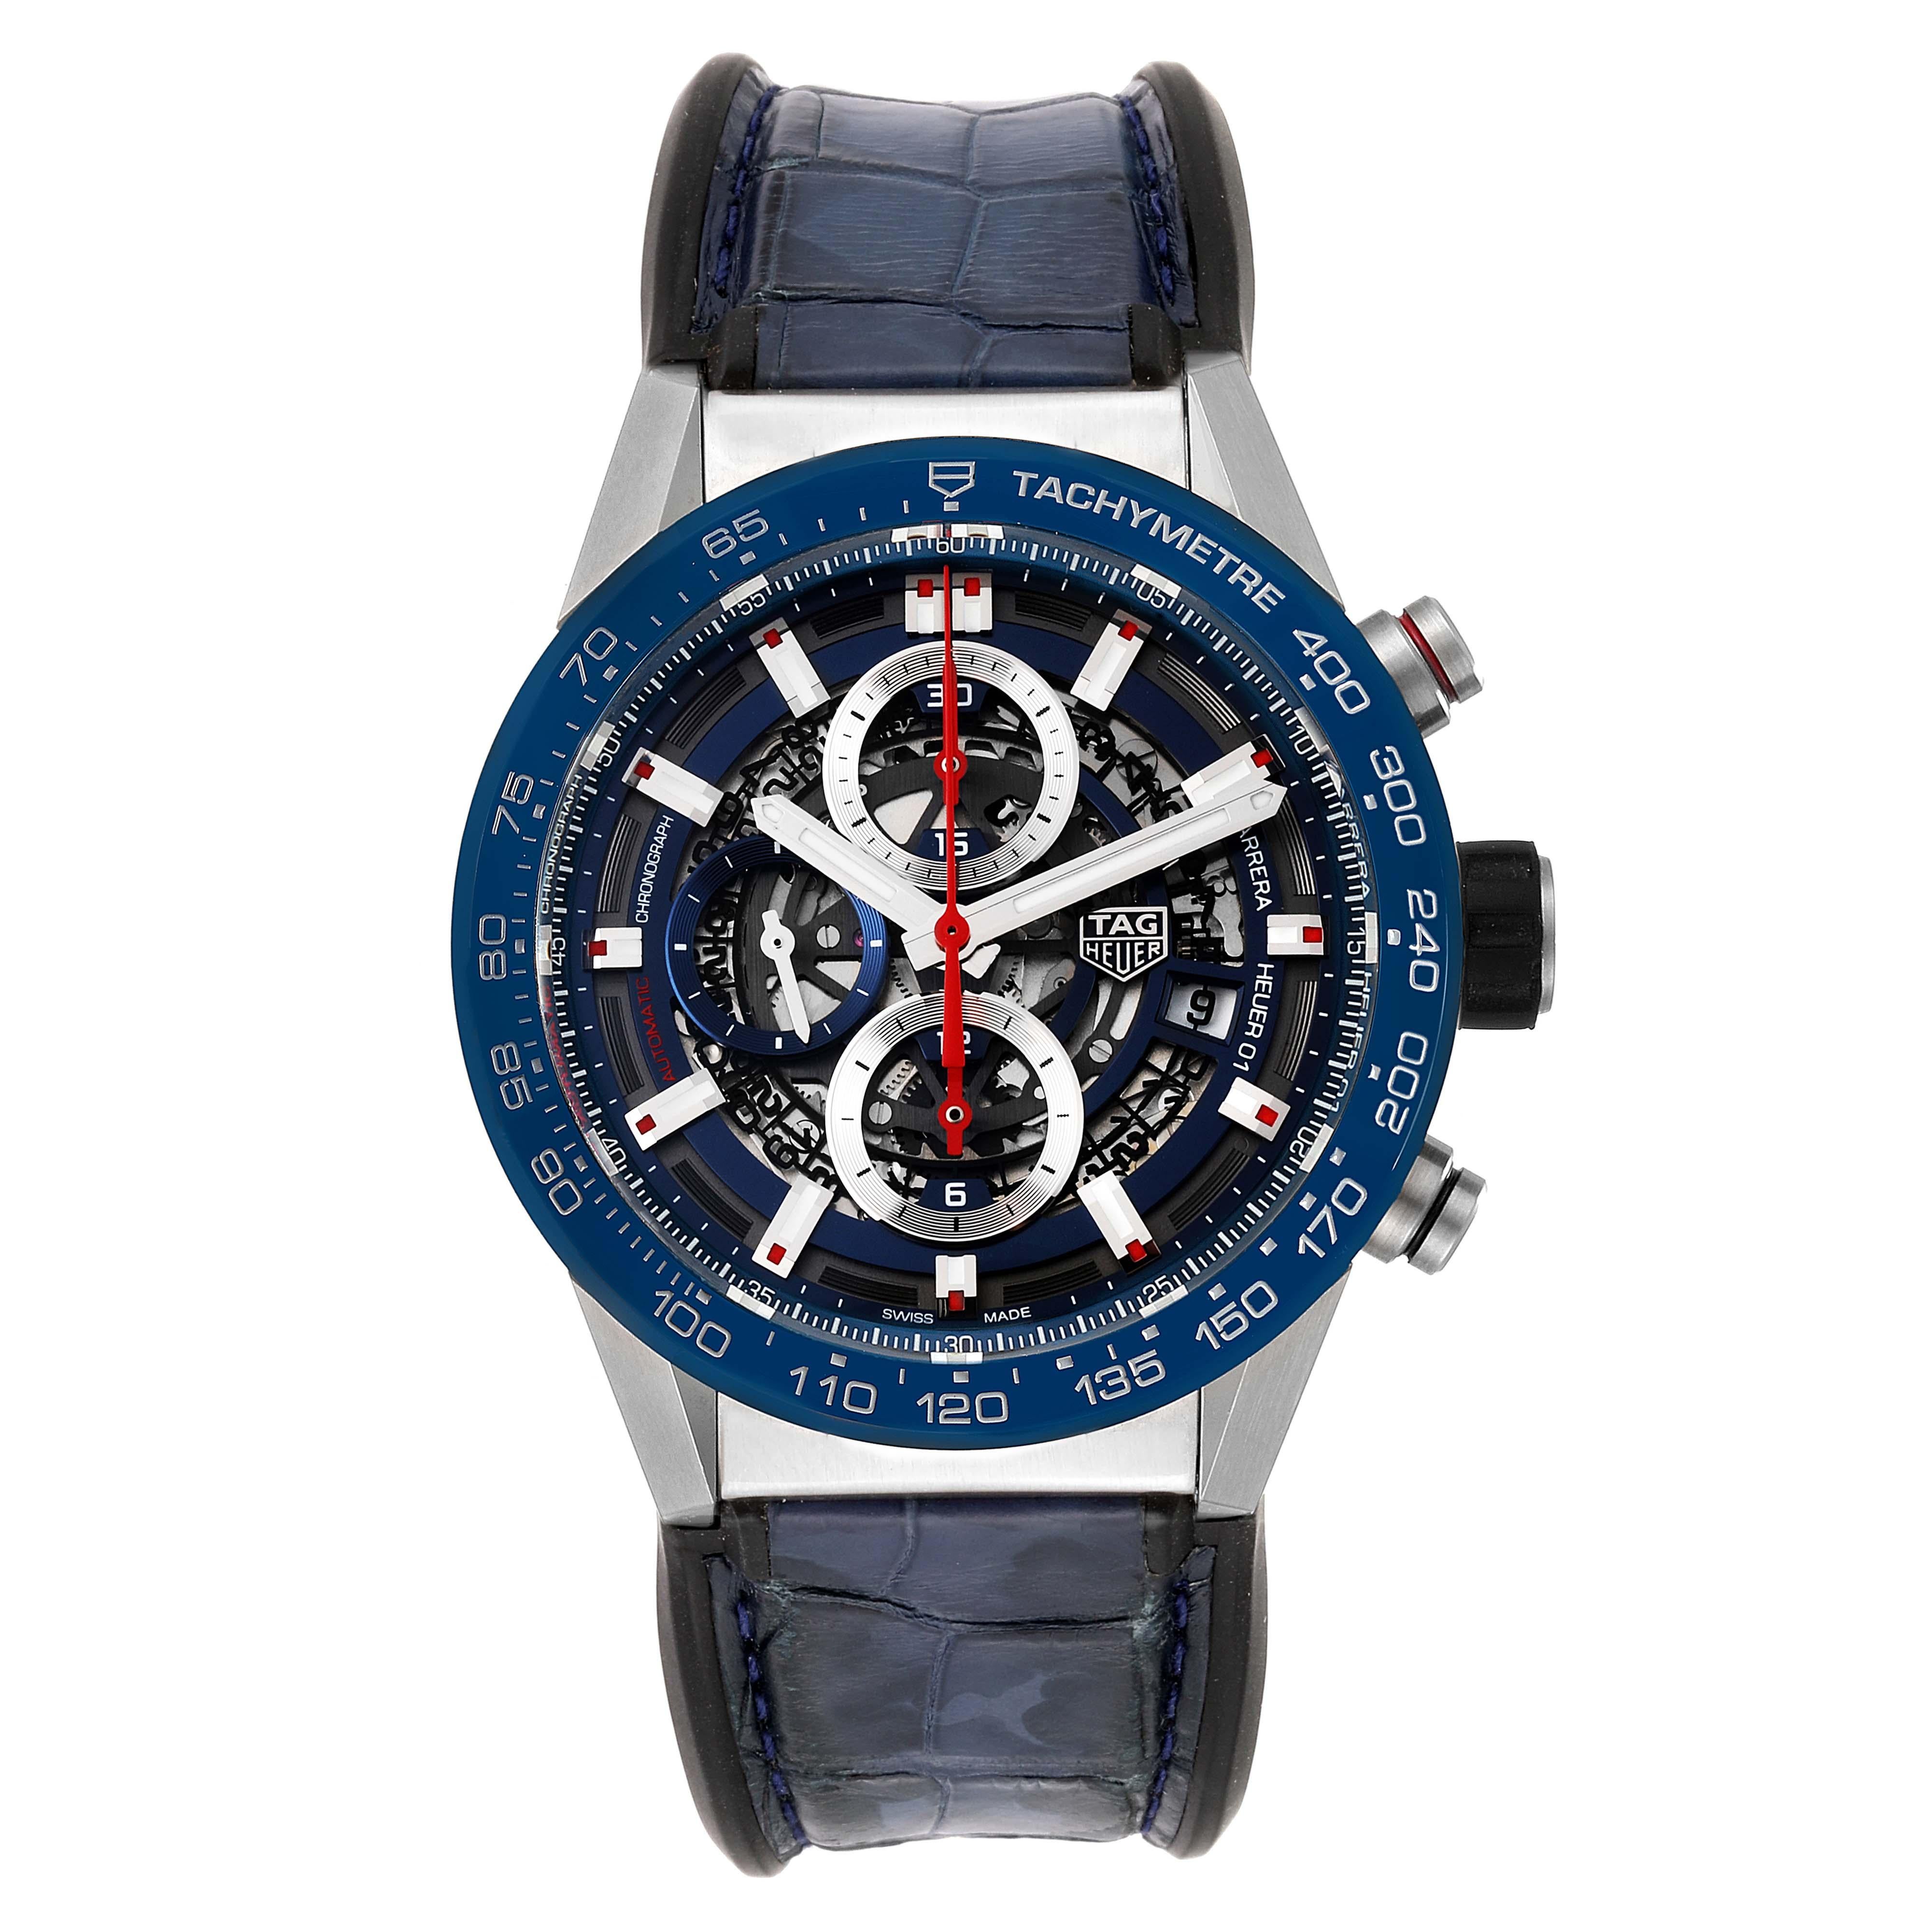 Tag Heuer Carrera Blue Skeleton Dial Chronograph Mens Watch CAR201T. Automatic self-winding chronograph movement. Stainless steel case 43.0 mm. Exhibition sapphire crystal case back. Blue bezel with tachymeter scale. Scratch resistant sapphire